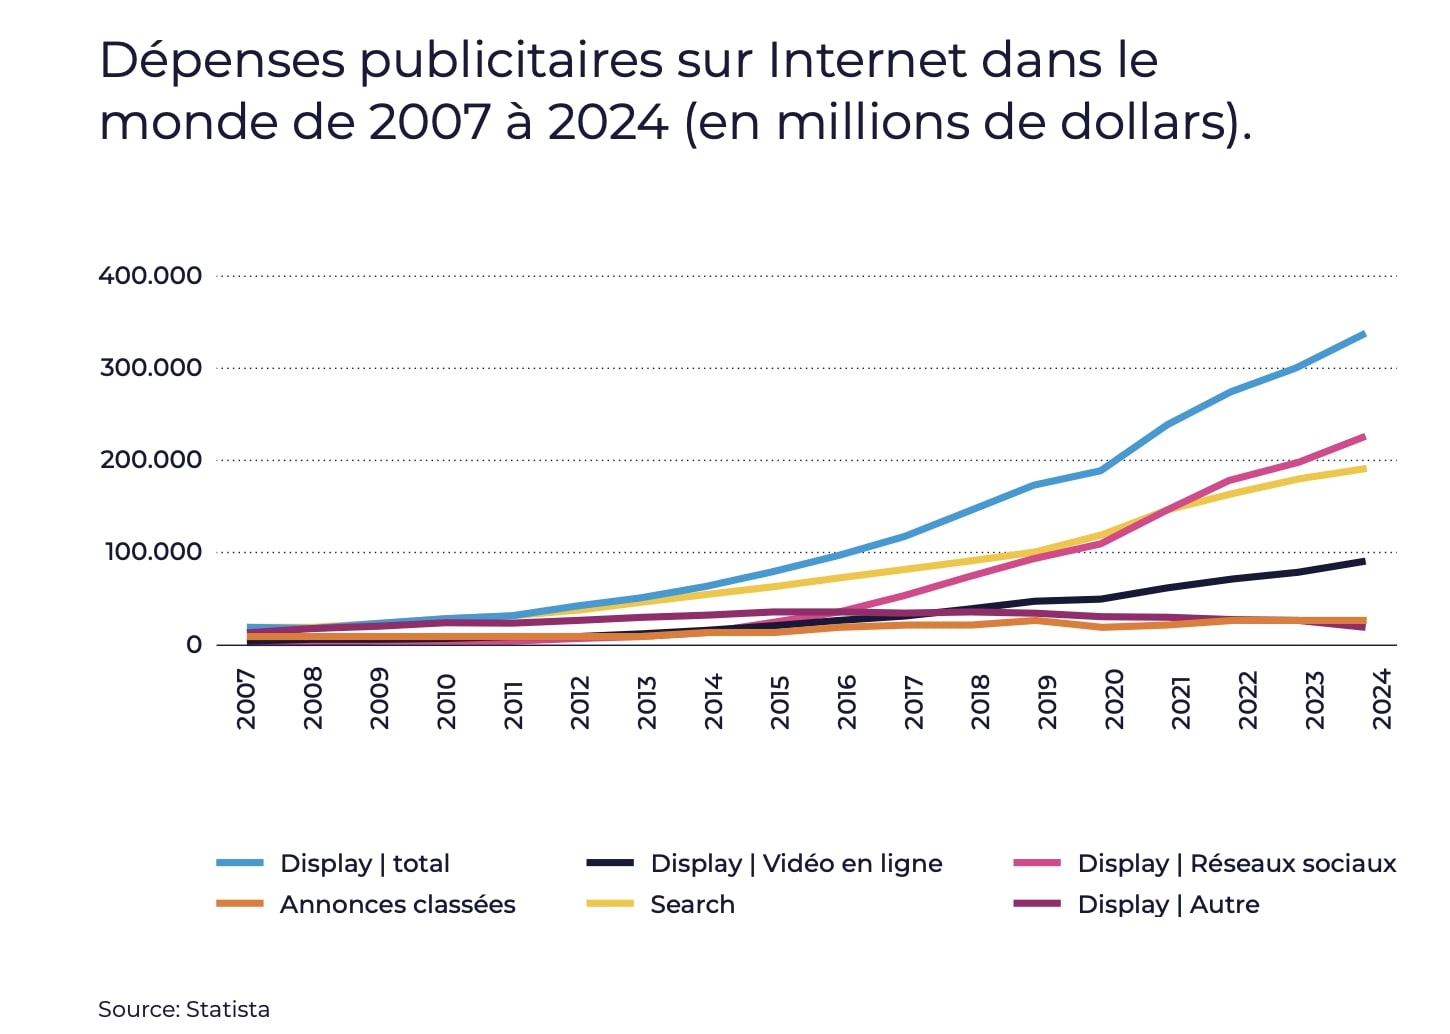 Worldwide Internet Advertising Spending from 2007 to 2024 (Millions of Dollars): Increase